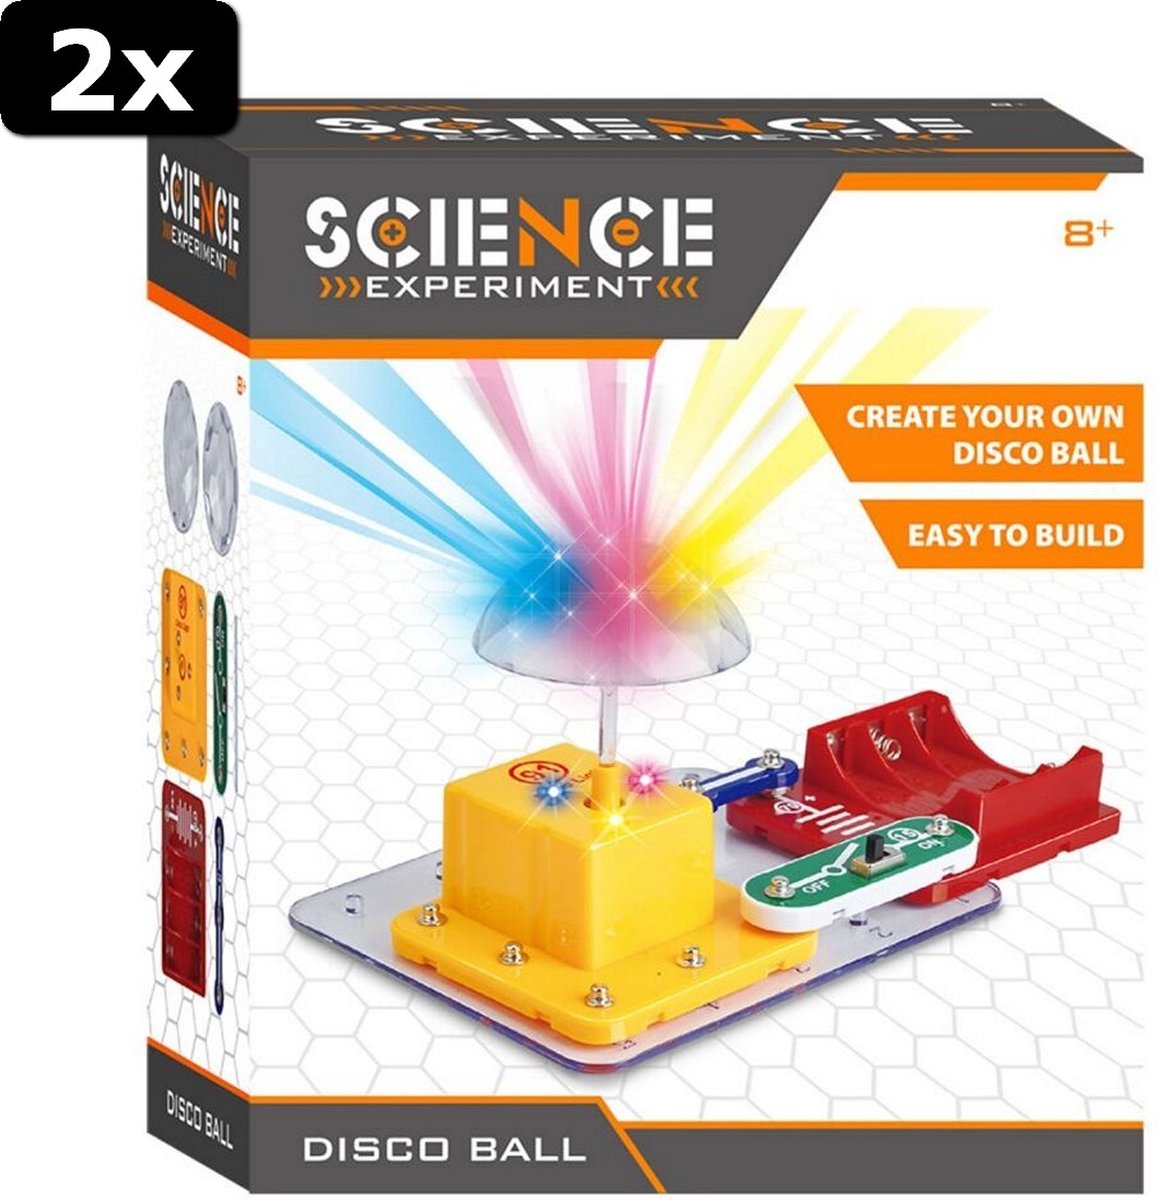 2x Science Discobal